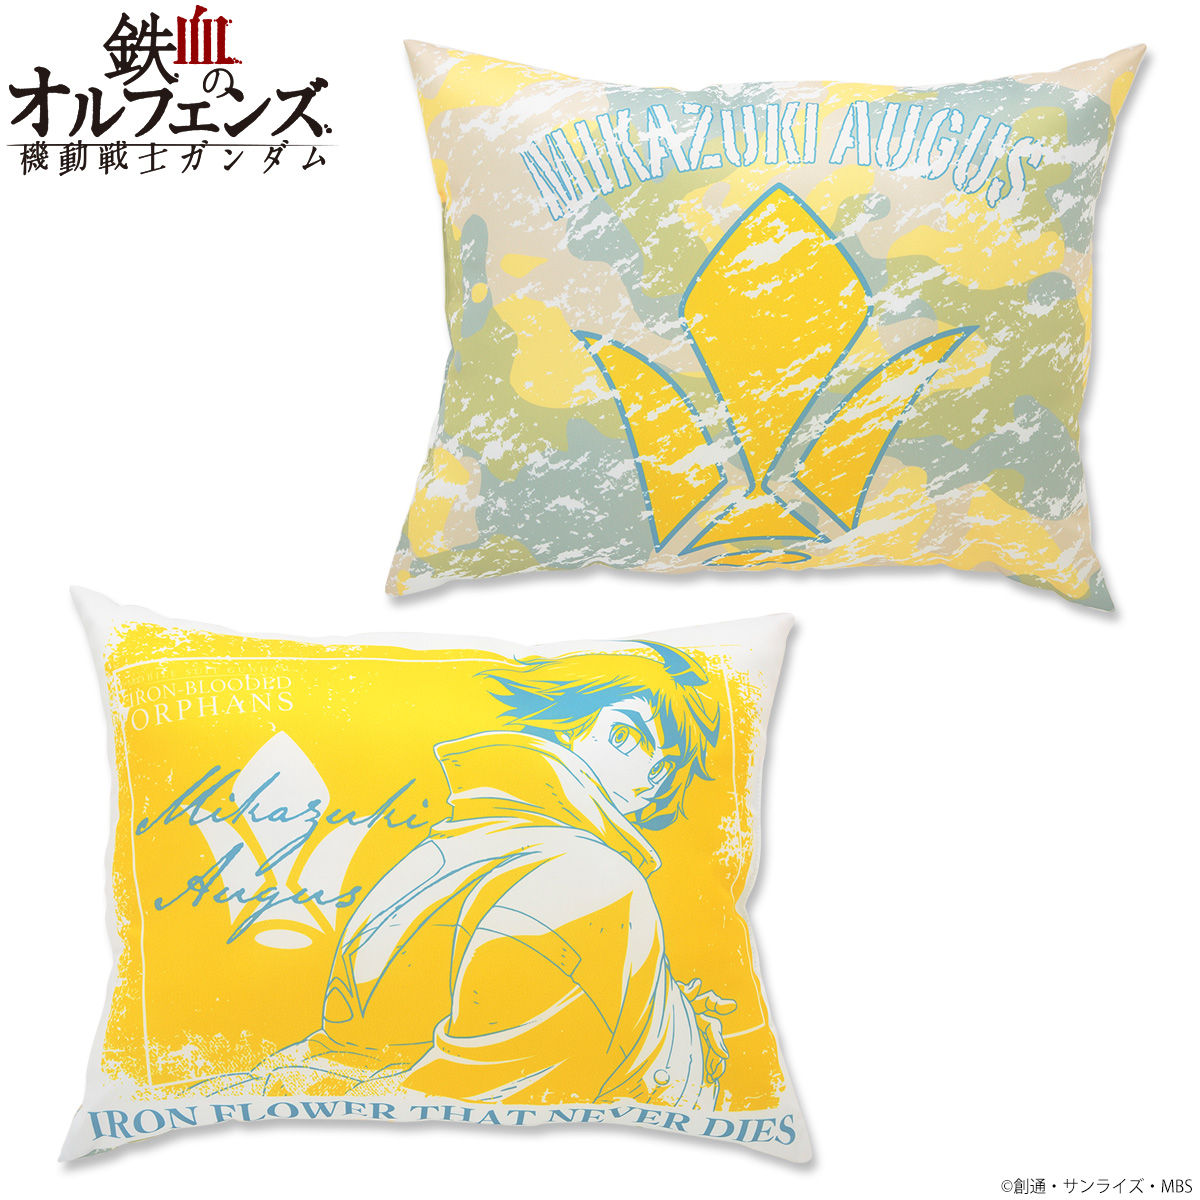 Mobile Suit Gundam: Iron-Blooded Orphans Tricolor-themed Pillow